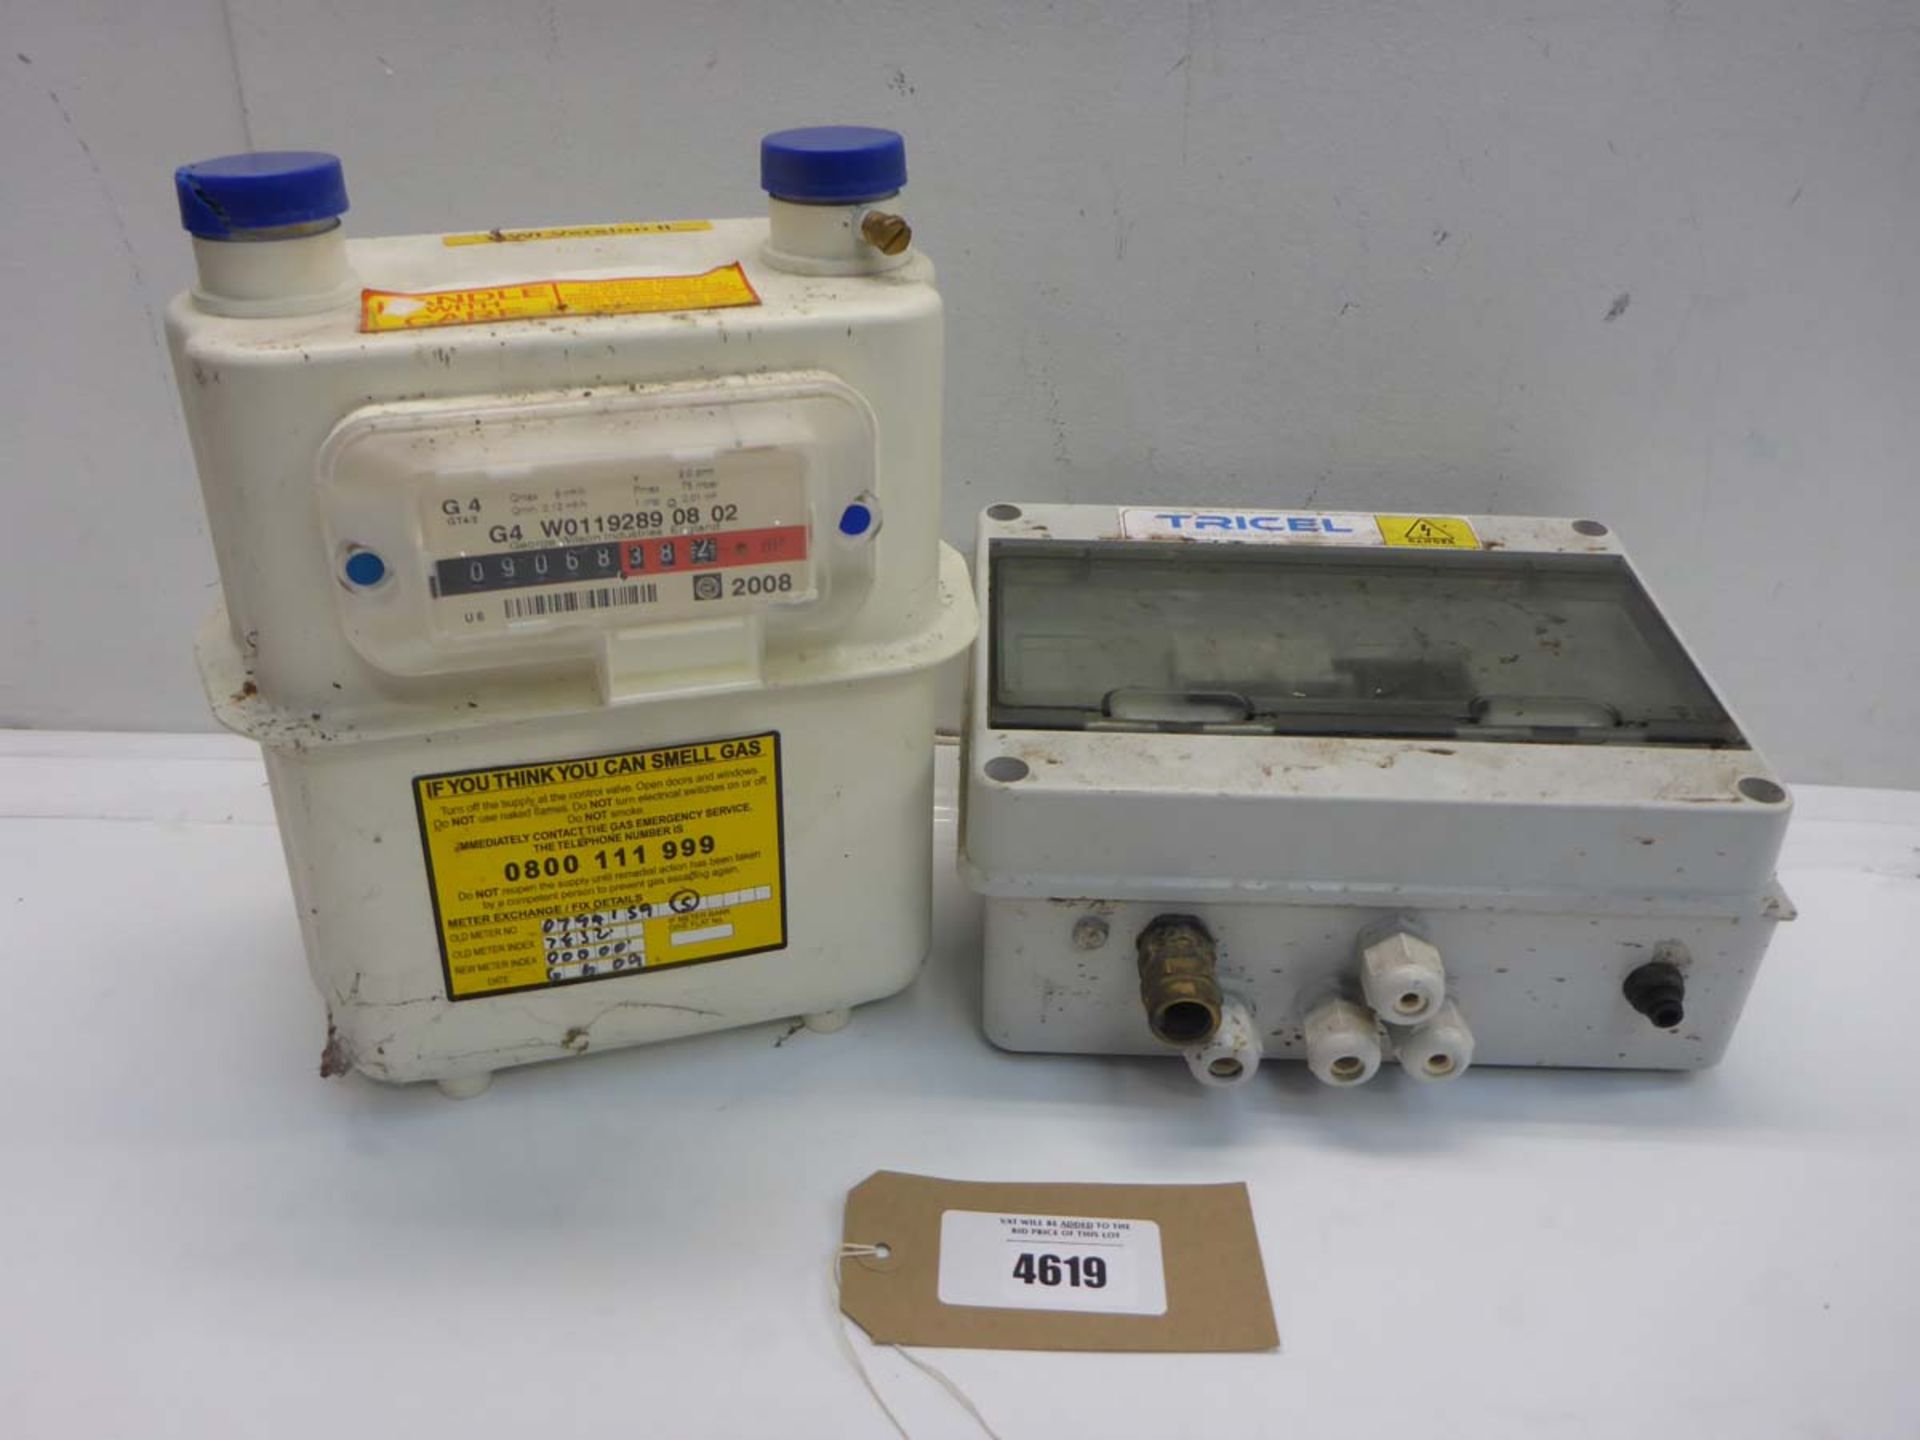 Diaphragm G4 gas meter and Trical electric fuse/breaker box